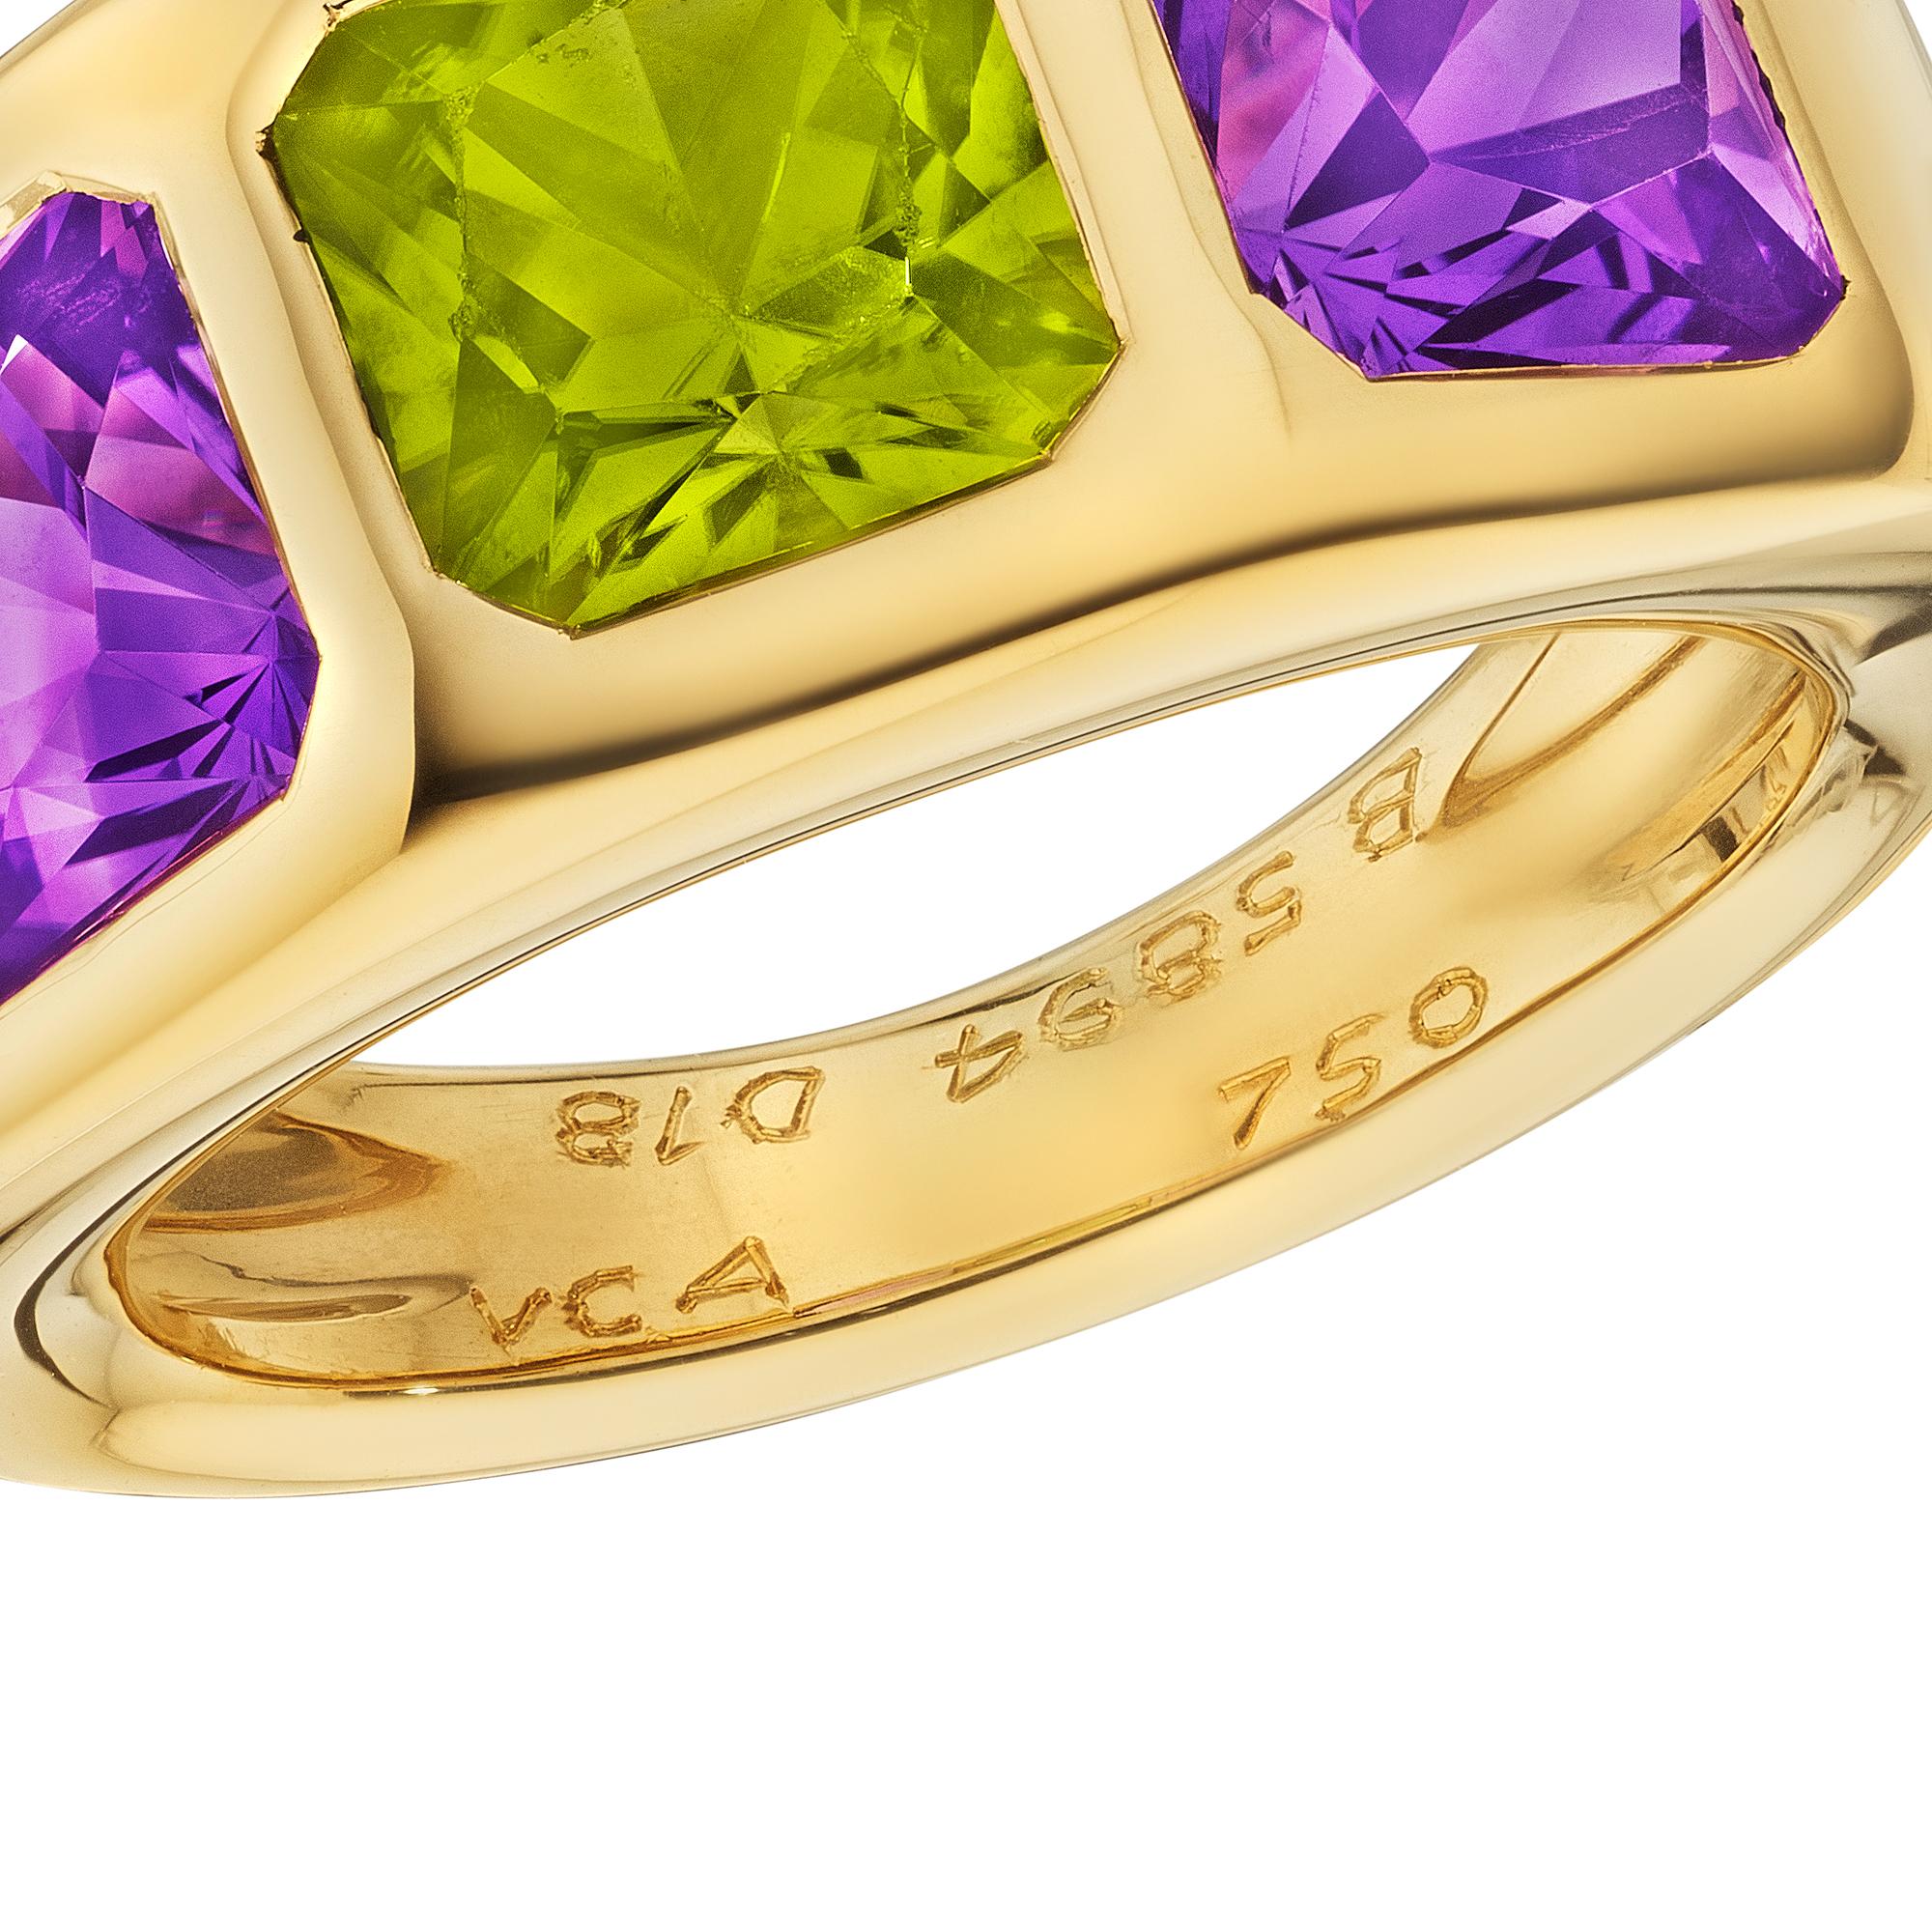 Van Cleef & Arpels Paris Cushion Cut Amethyst Peridot Vintage Gold Ring In Excellent Condition For Sale In Greenwich, CT